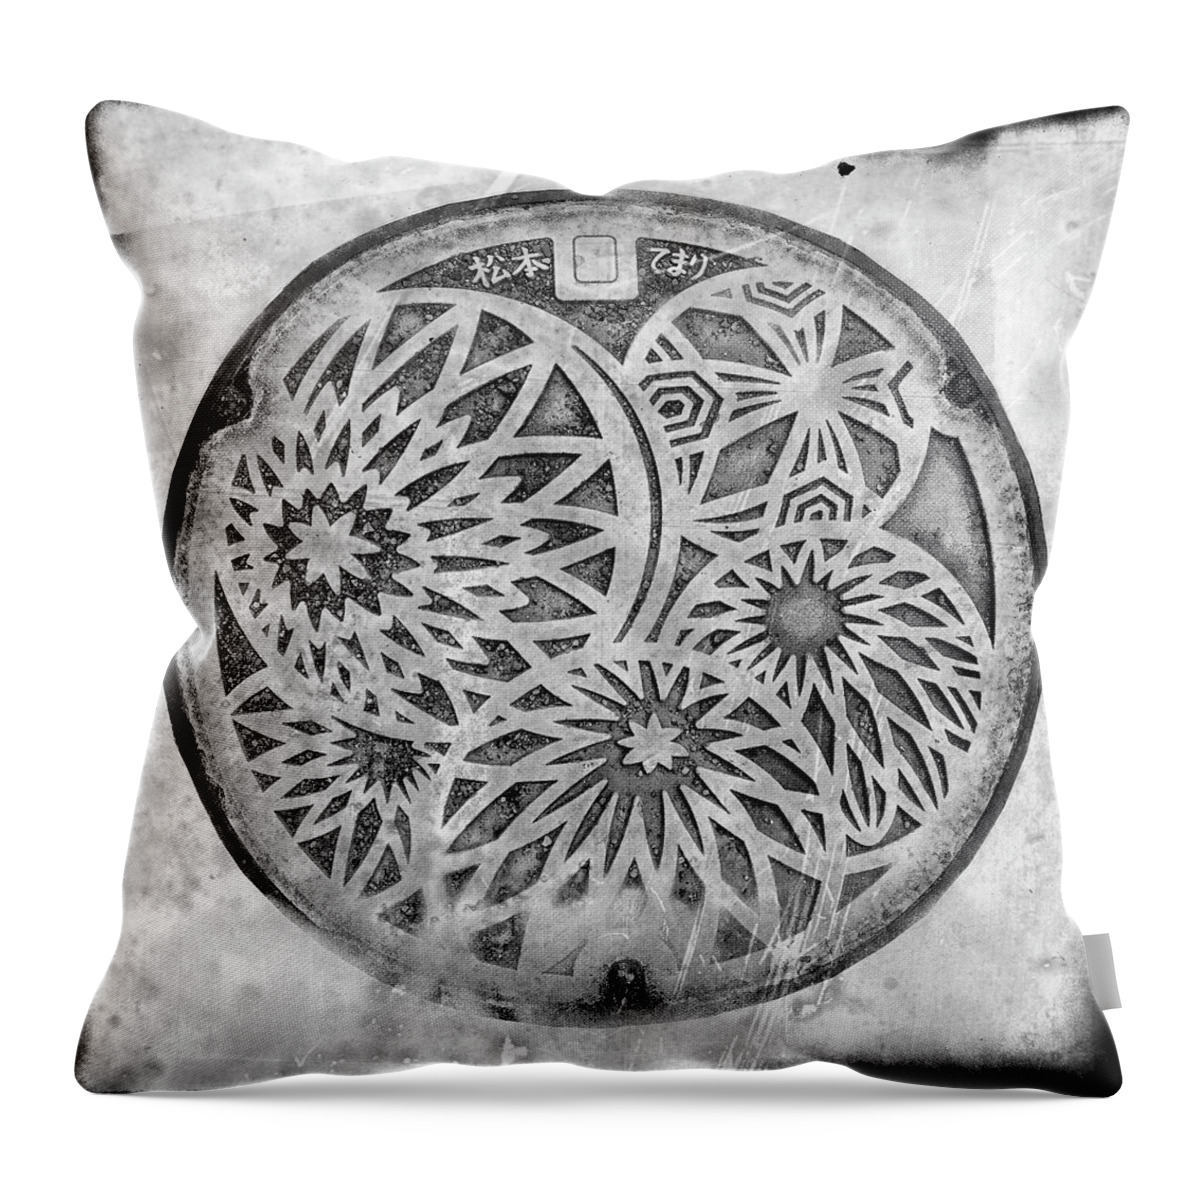 Manhole Cover Throw Pillow featuring the photograph Manhole Cover 6 by Dominic Piperata